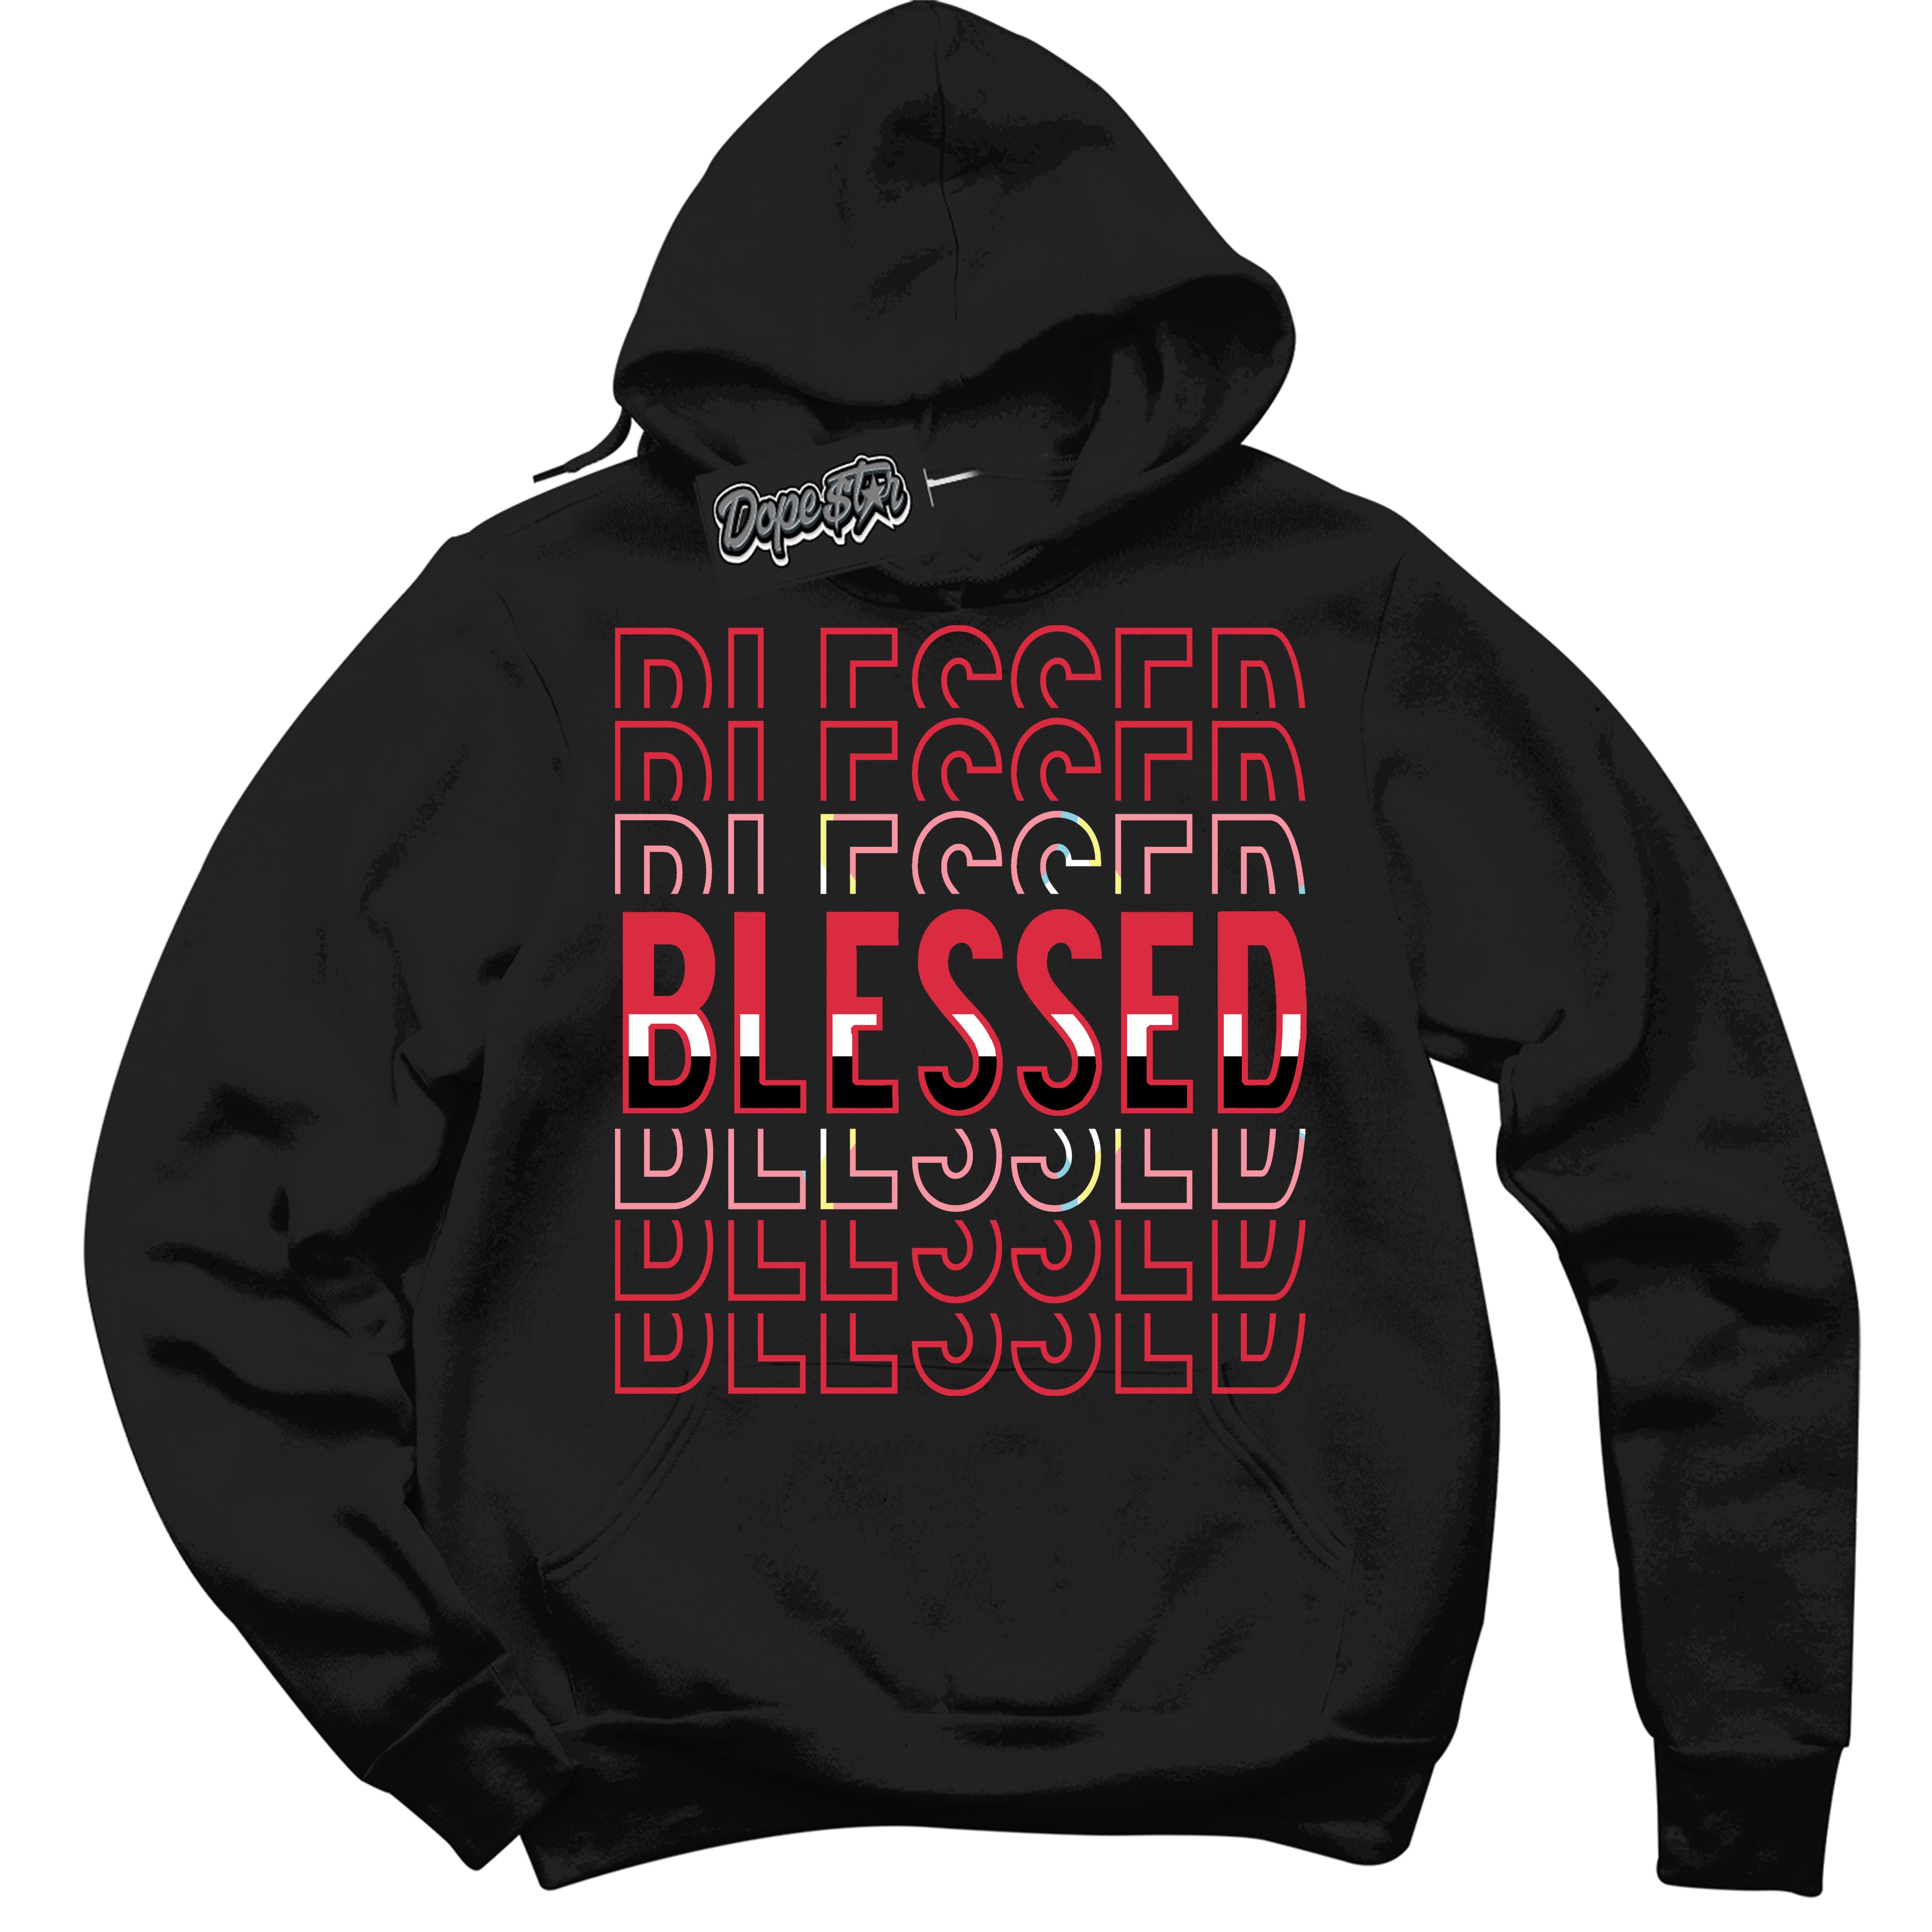 Cool Black Graphic DopeStar Hoodie with “ Blessed Stacked “ print, that perfectly matches Spider-Verse 1s sneakers